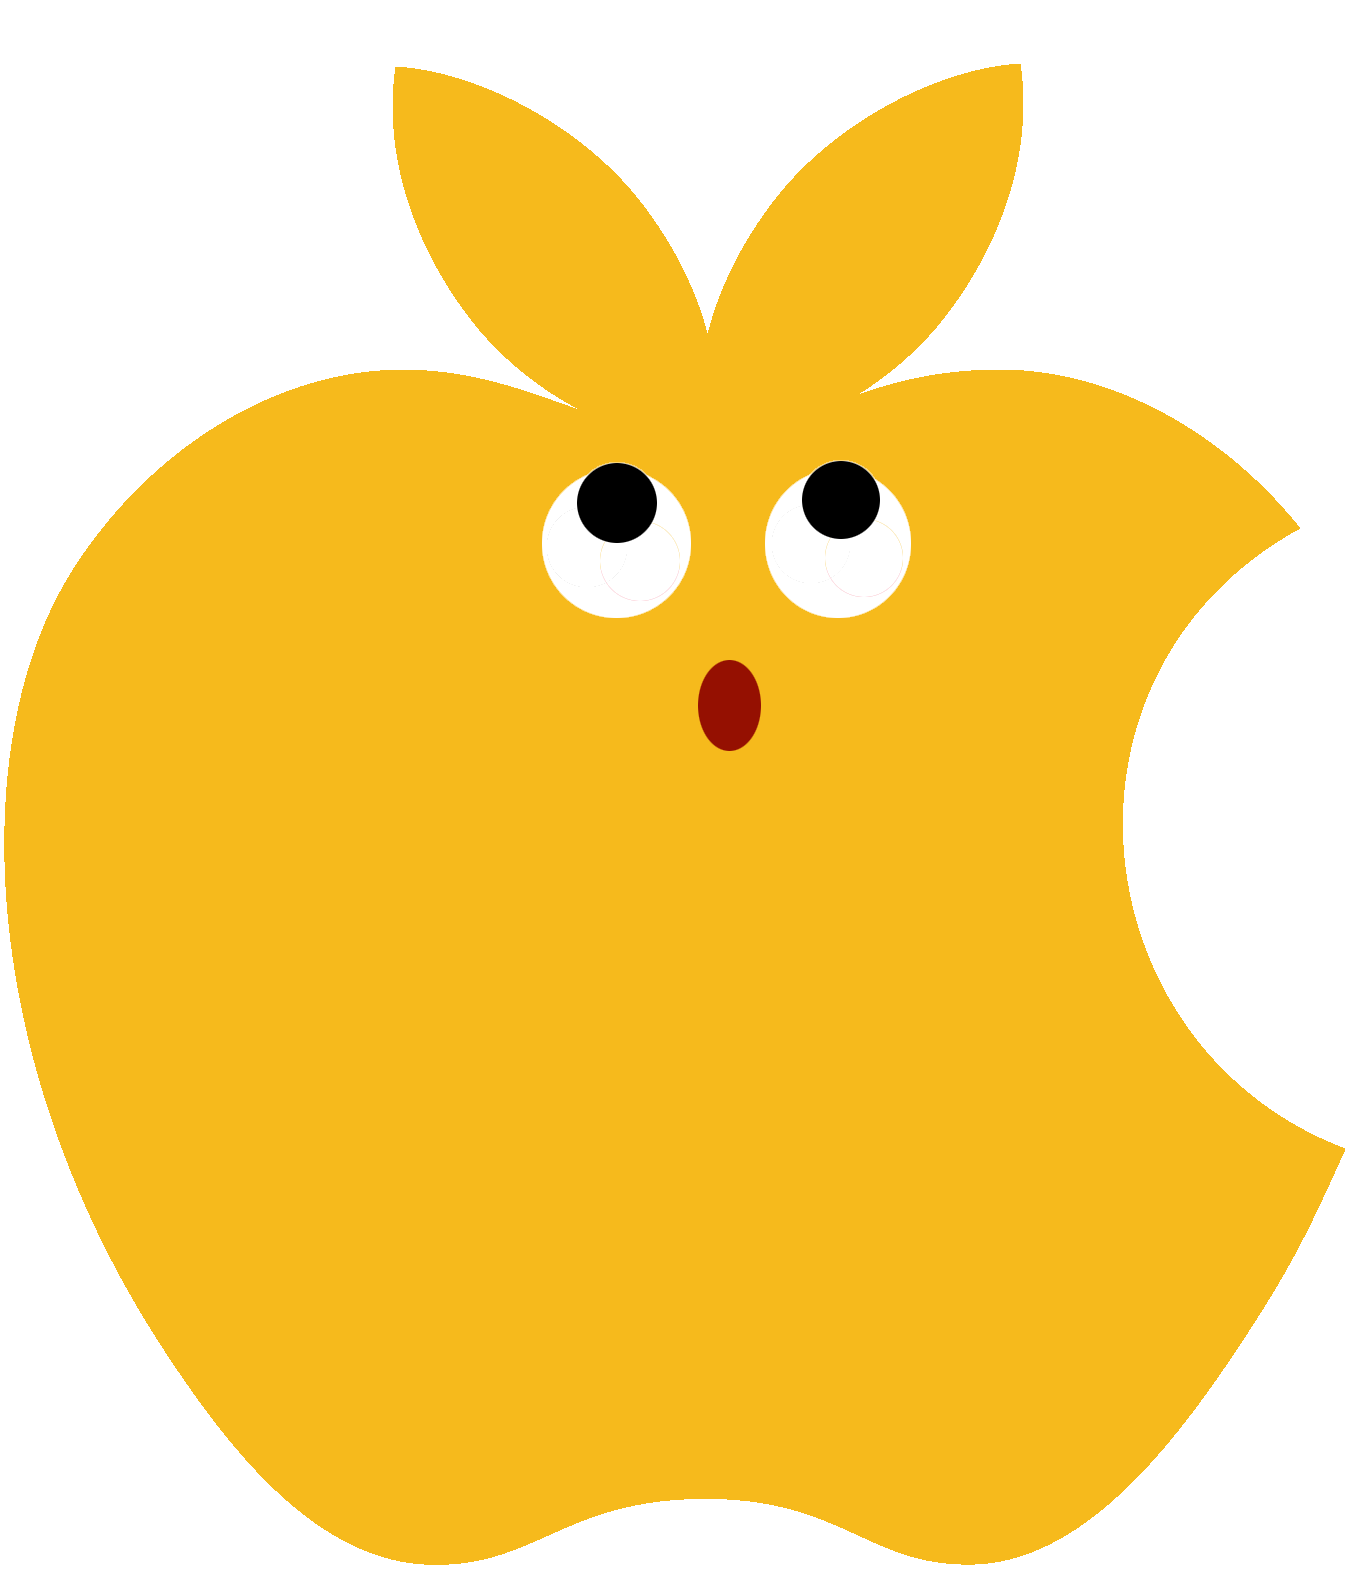 LocoRoco Backgrounds, Compatible - PC, Mobile, Gadgets| 1350x1570 px